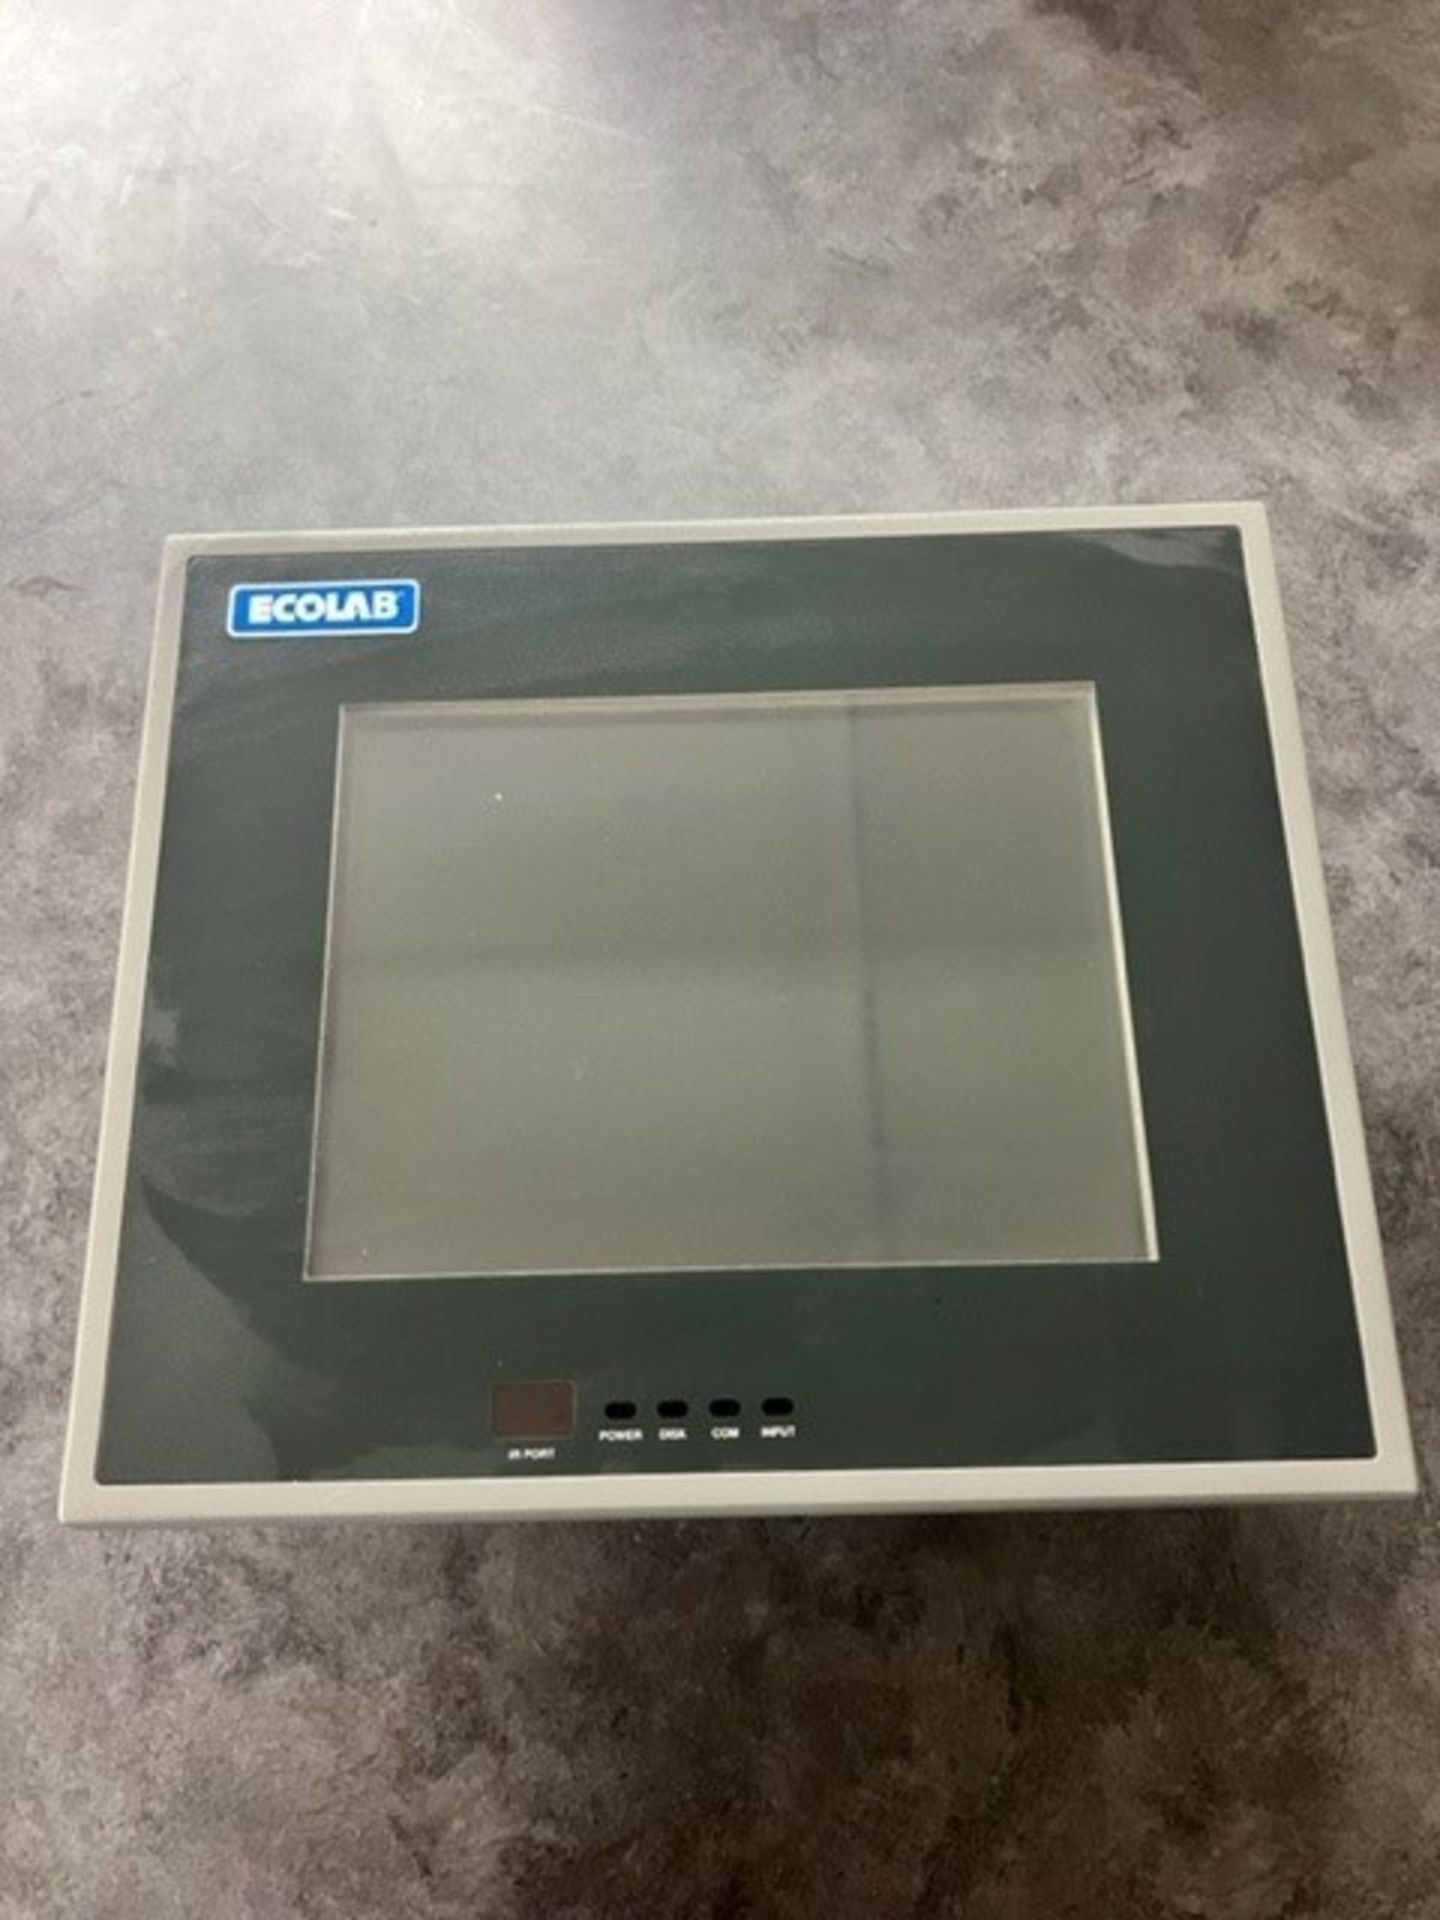 Ecolab Interface Touchpad Display, Model 3410 T, S/N 676899-3D0, Fits Aprox. 11-1/2" x 9-1/2" - Image 3 of 3